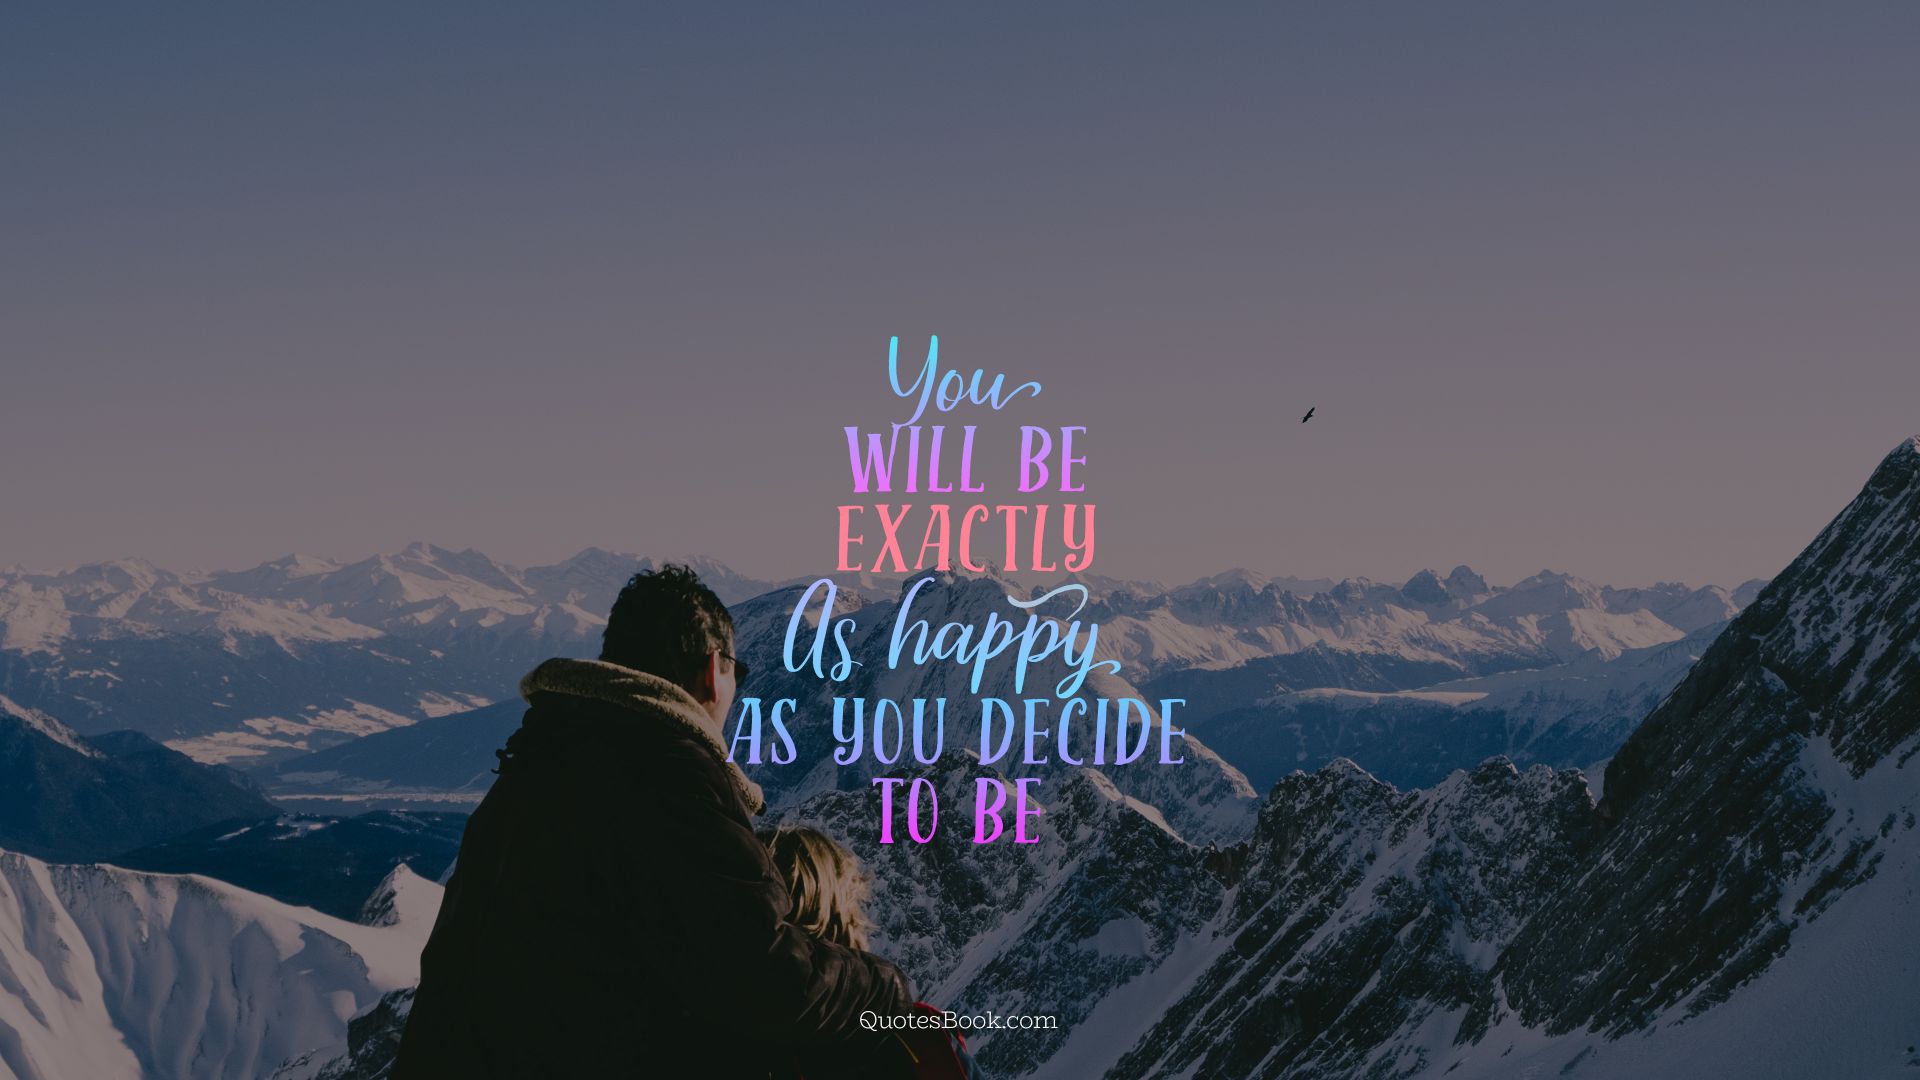 You will be exactly as happy as you decide to be